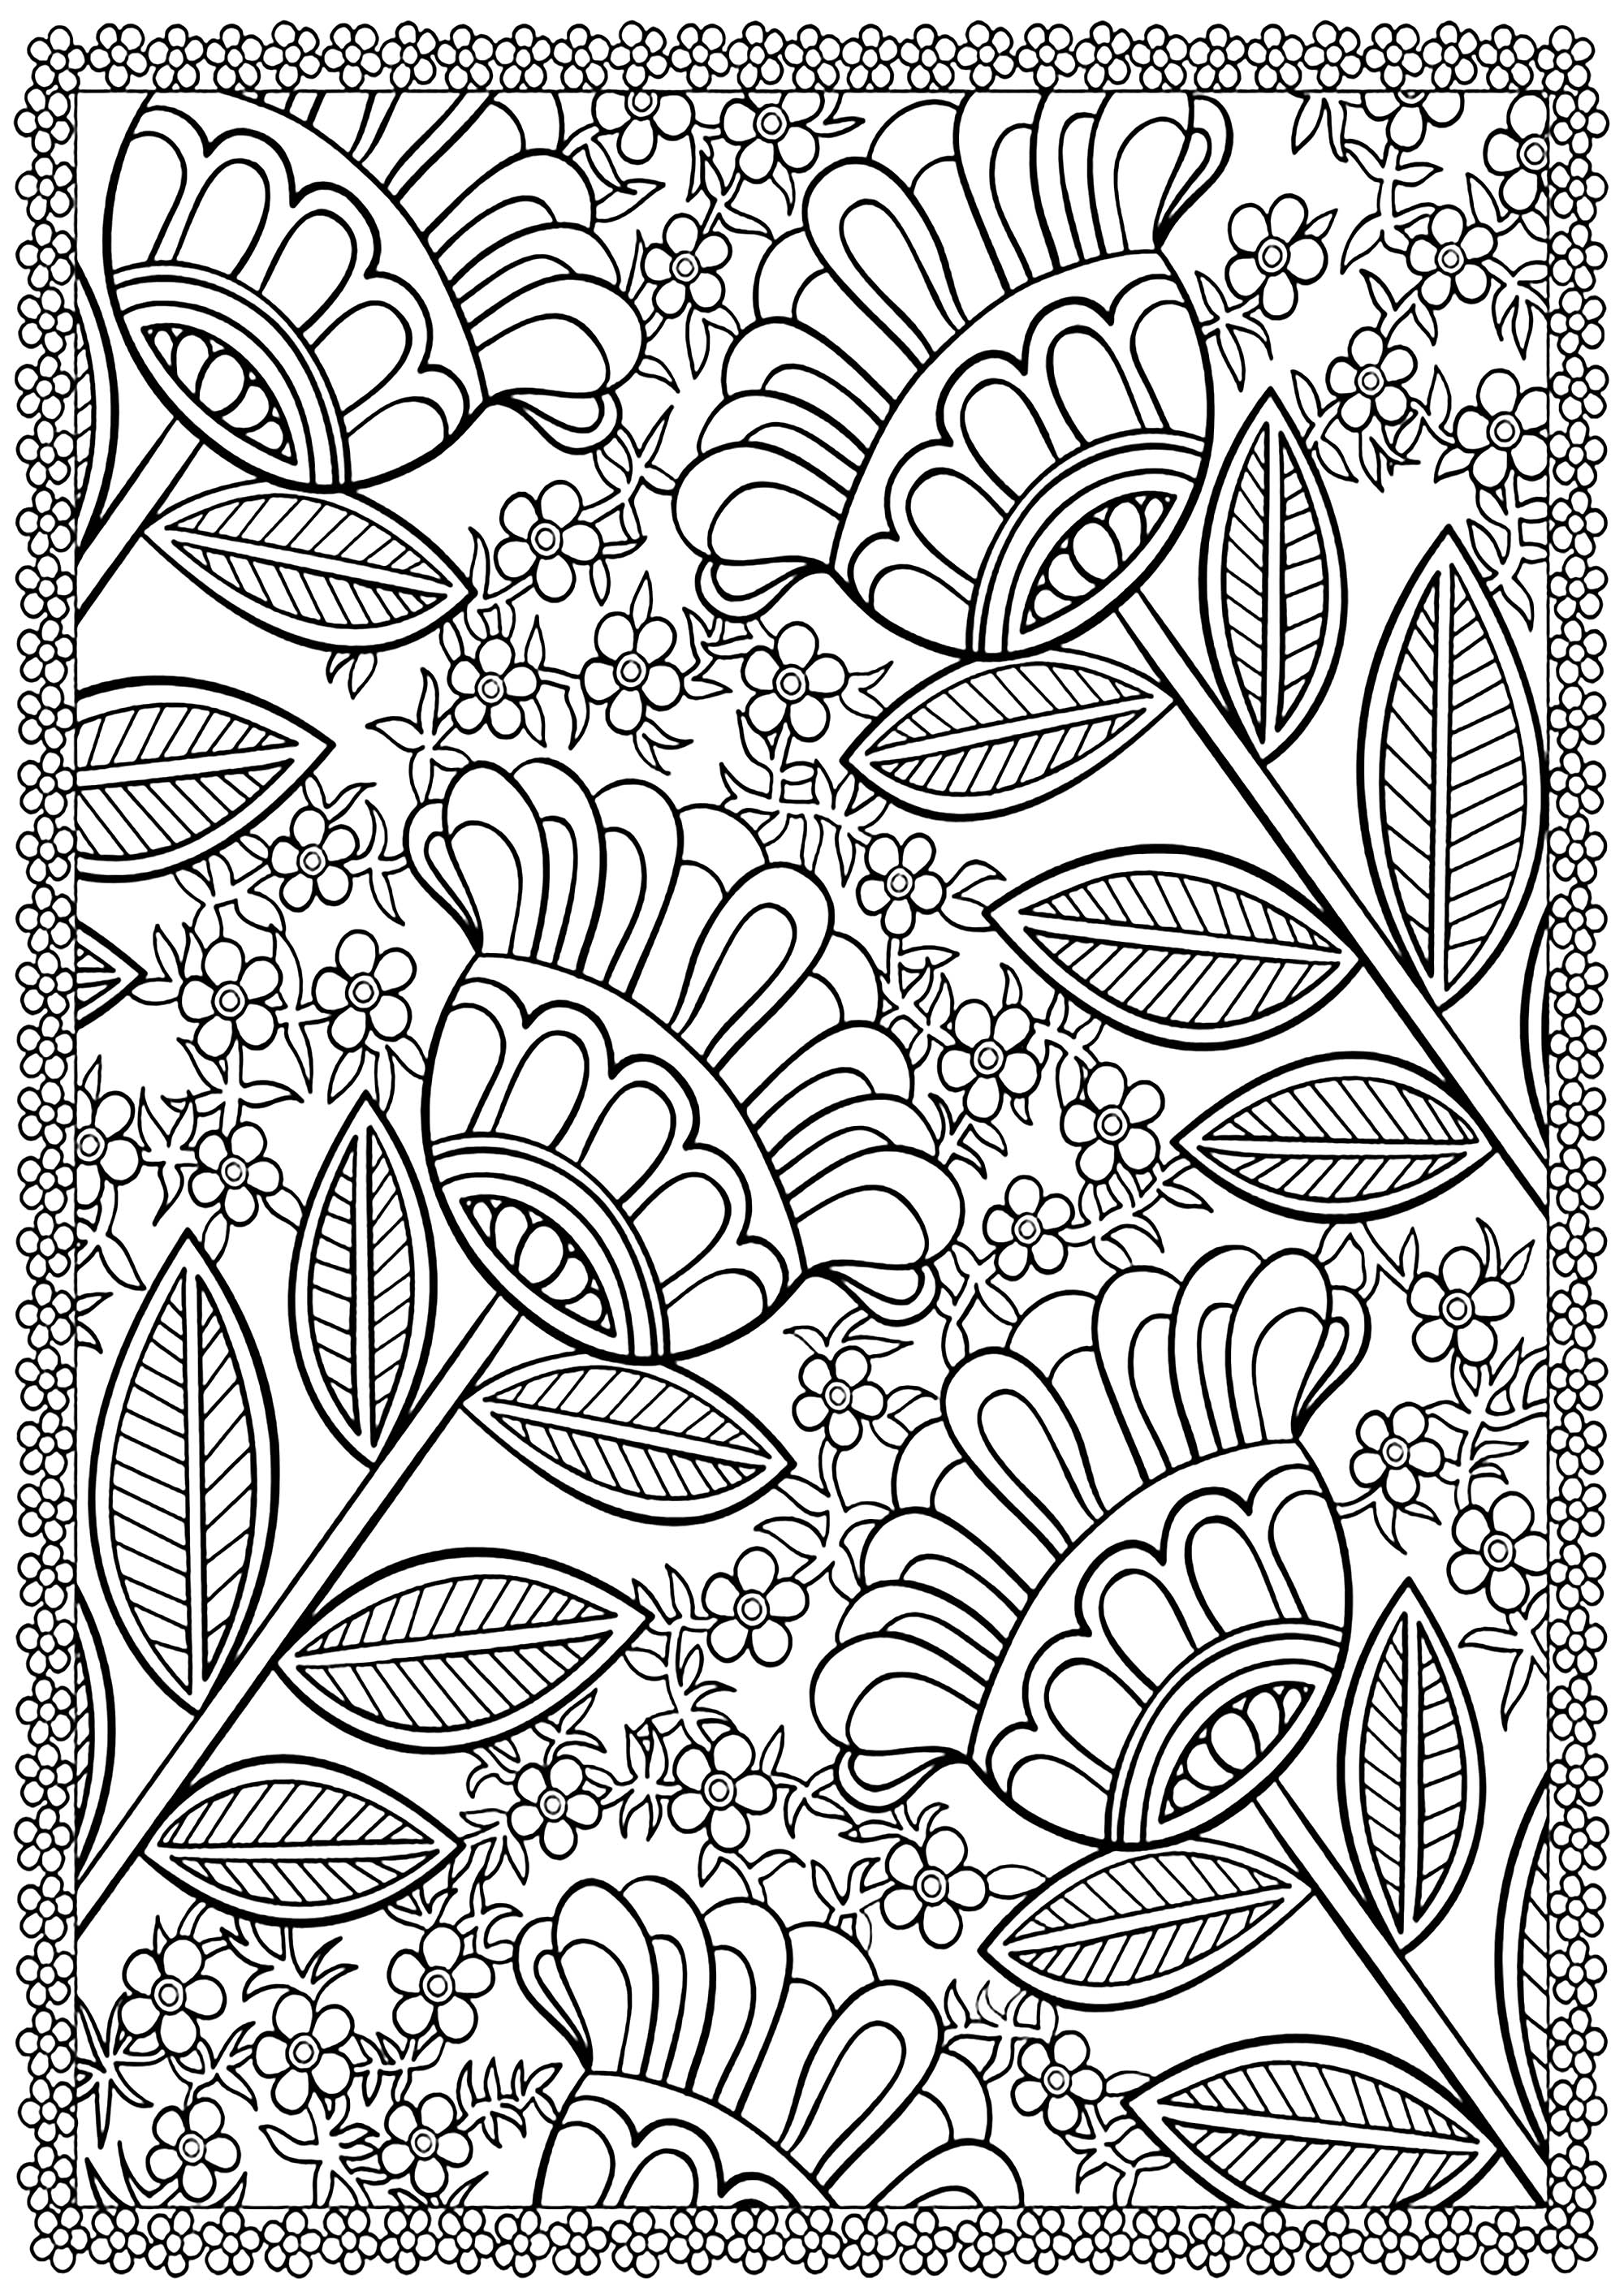 Color these four flowers surrounded by small ones, with a beautiful flowered border, Artist : Art. Isabelle